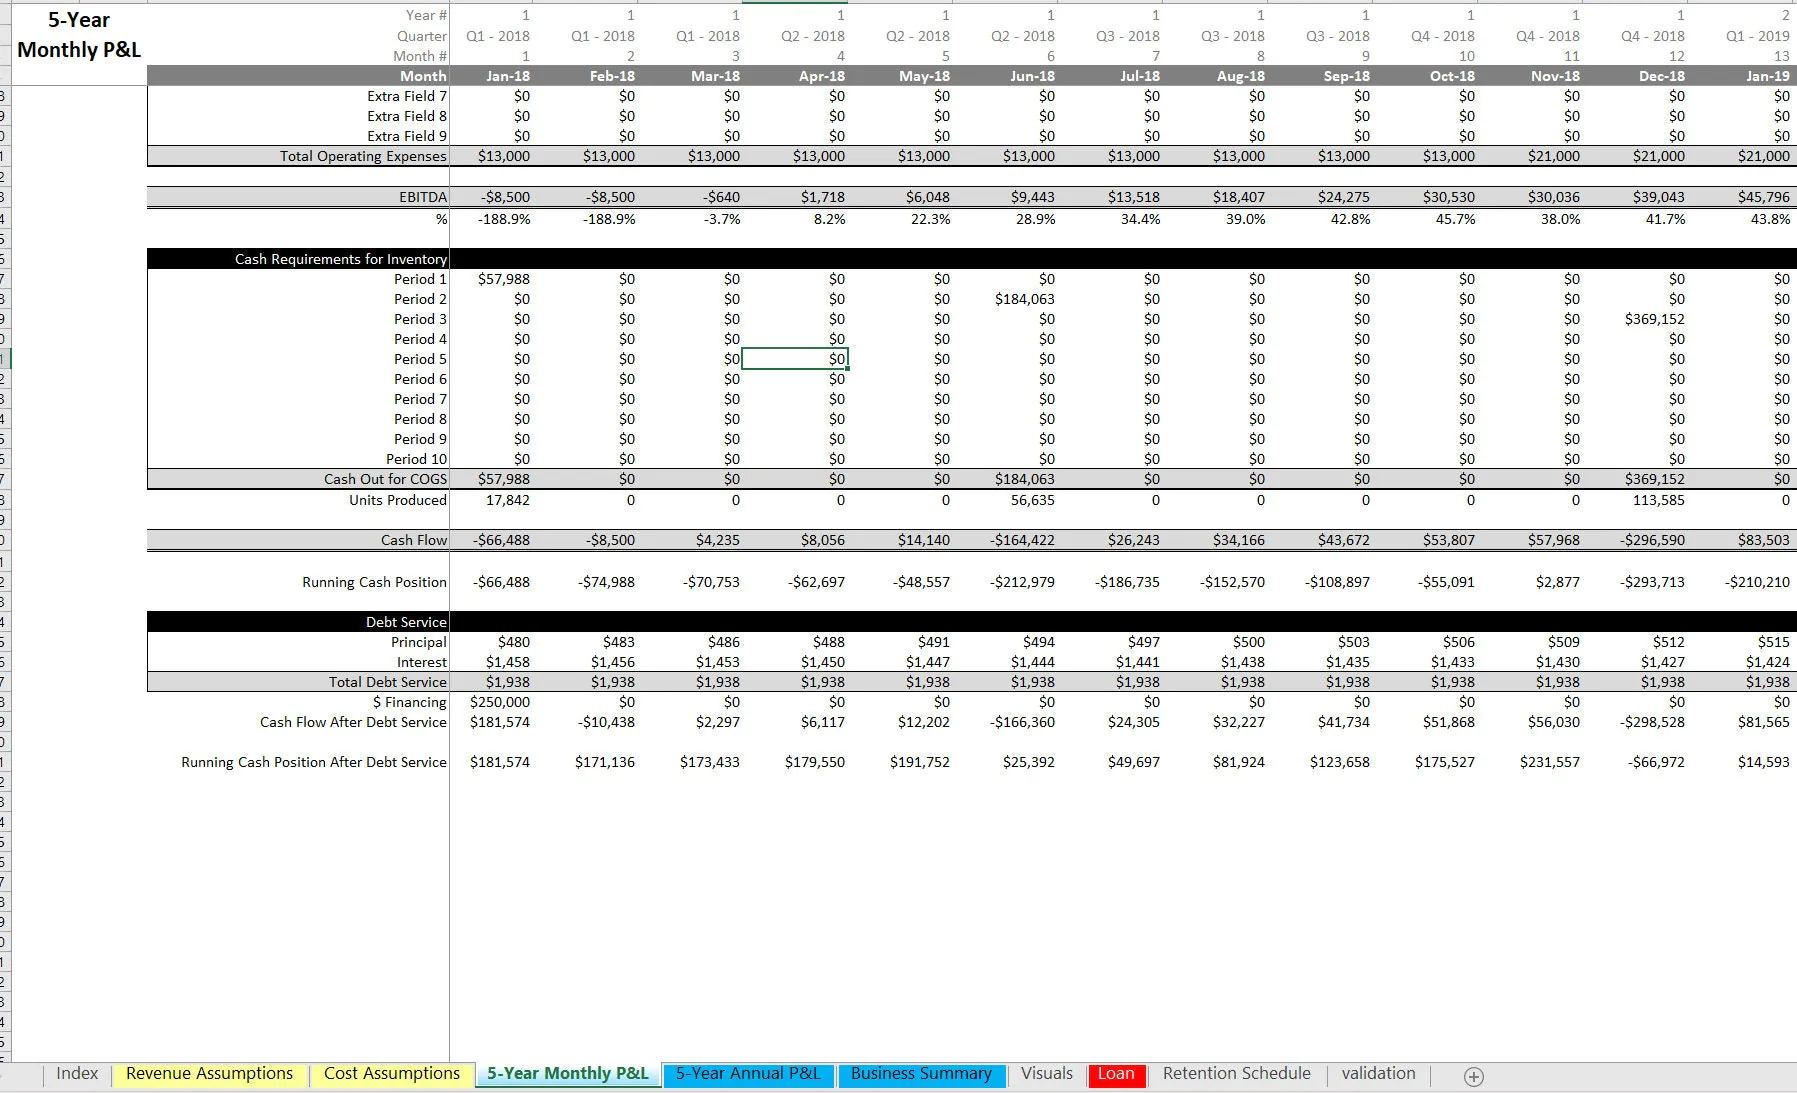 This is a partial preview of Manufacturing Sales Model: Driven off Customer Repurchase Logic (Excel workbook (XLSX)). 